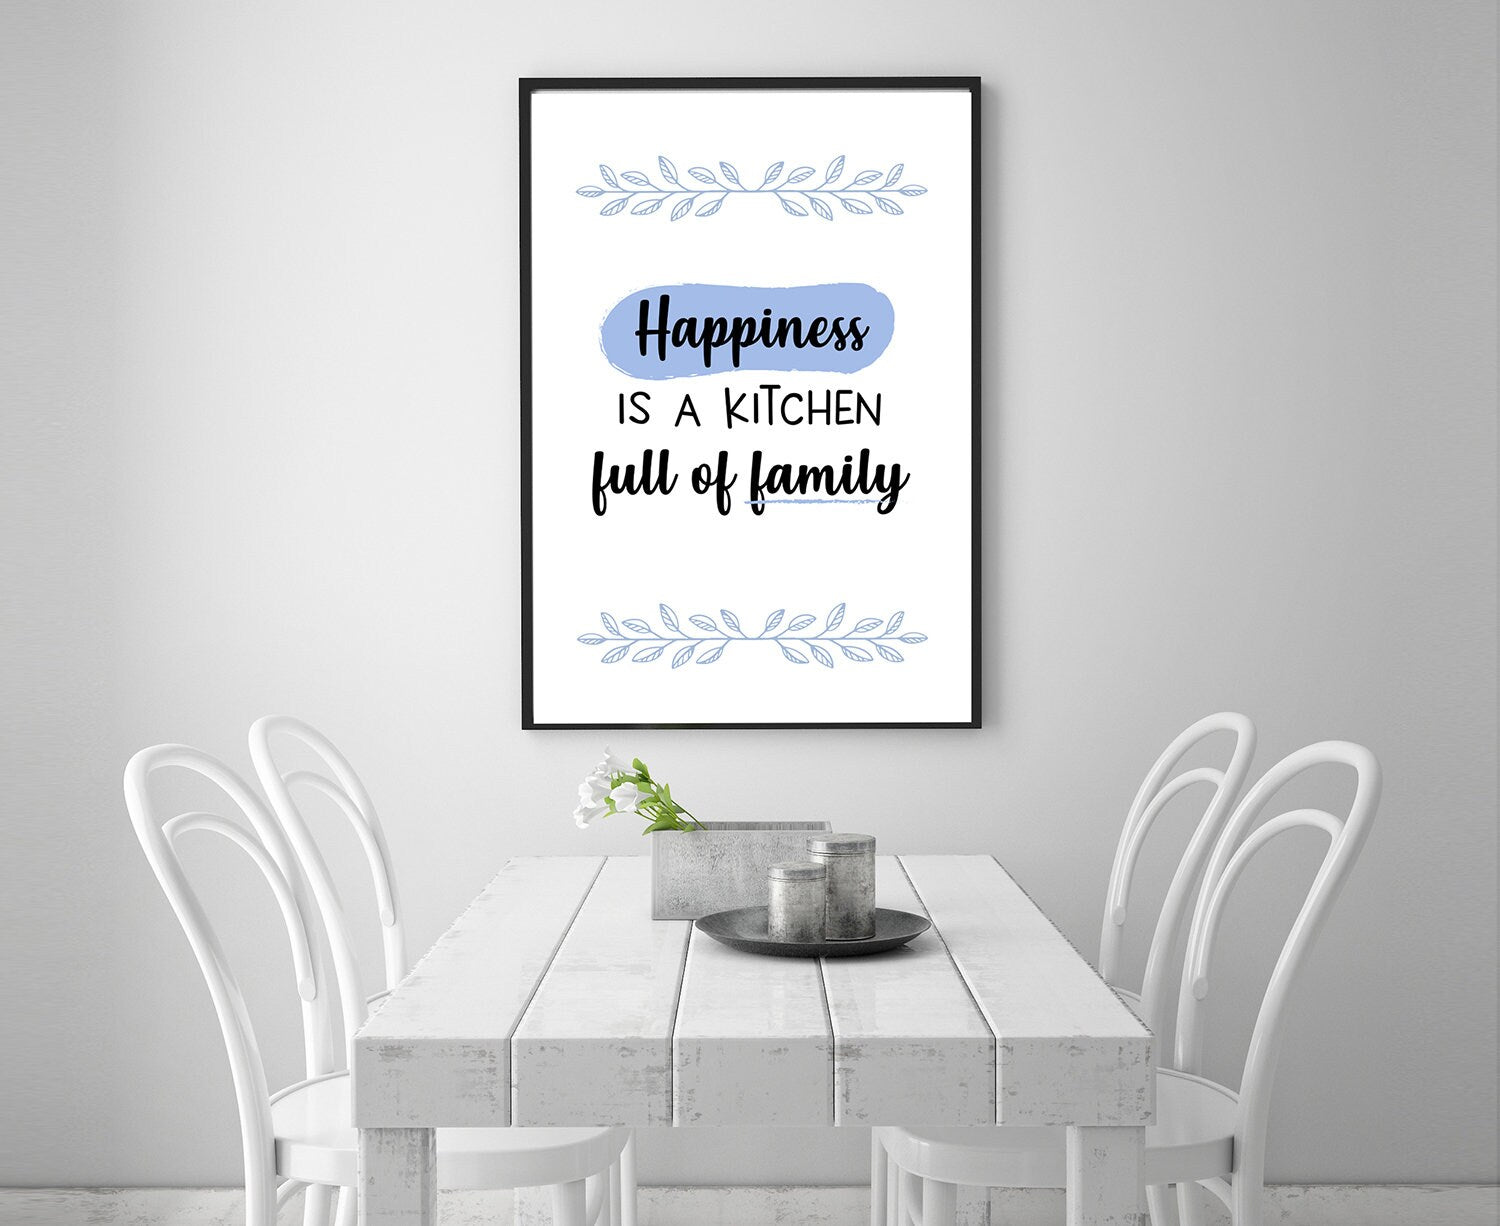 Happiness is a Kitchen full of FAMILY, Kitchen Quote,Family Quote, Kitchen wall art, Kitchen wall decor, Kitchen poster,Living room wall art